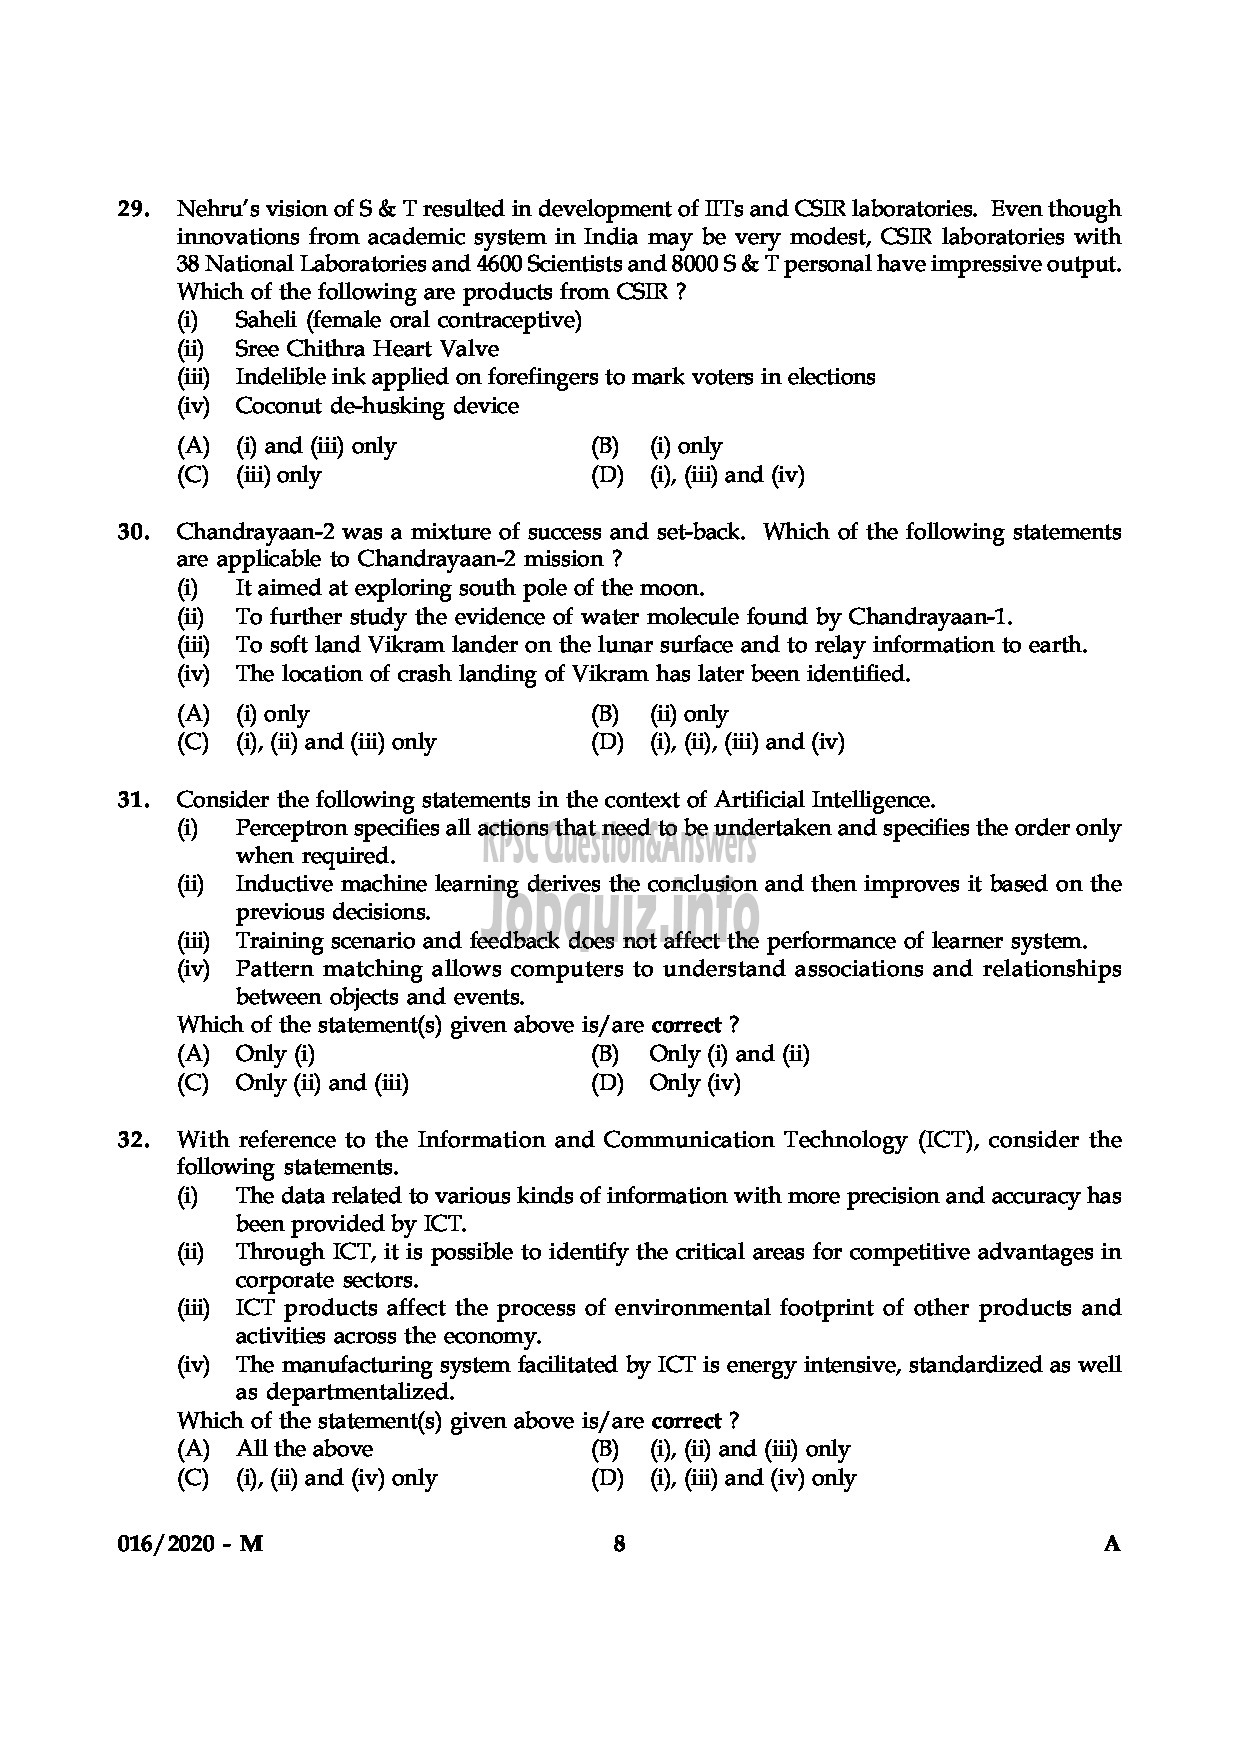 Kerala PSC Question Paper - KAS OFFICER (JUNIOR TIME SCALE) TRAINEE KERALA ADMINISTRATIVE SERVICE-8